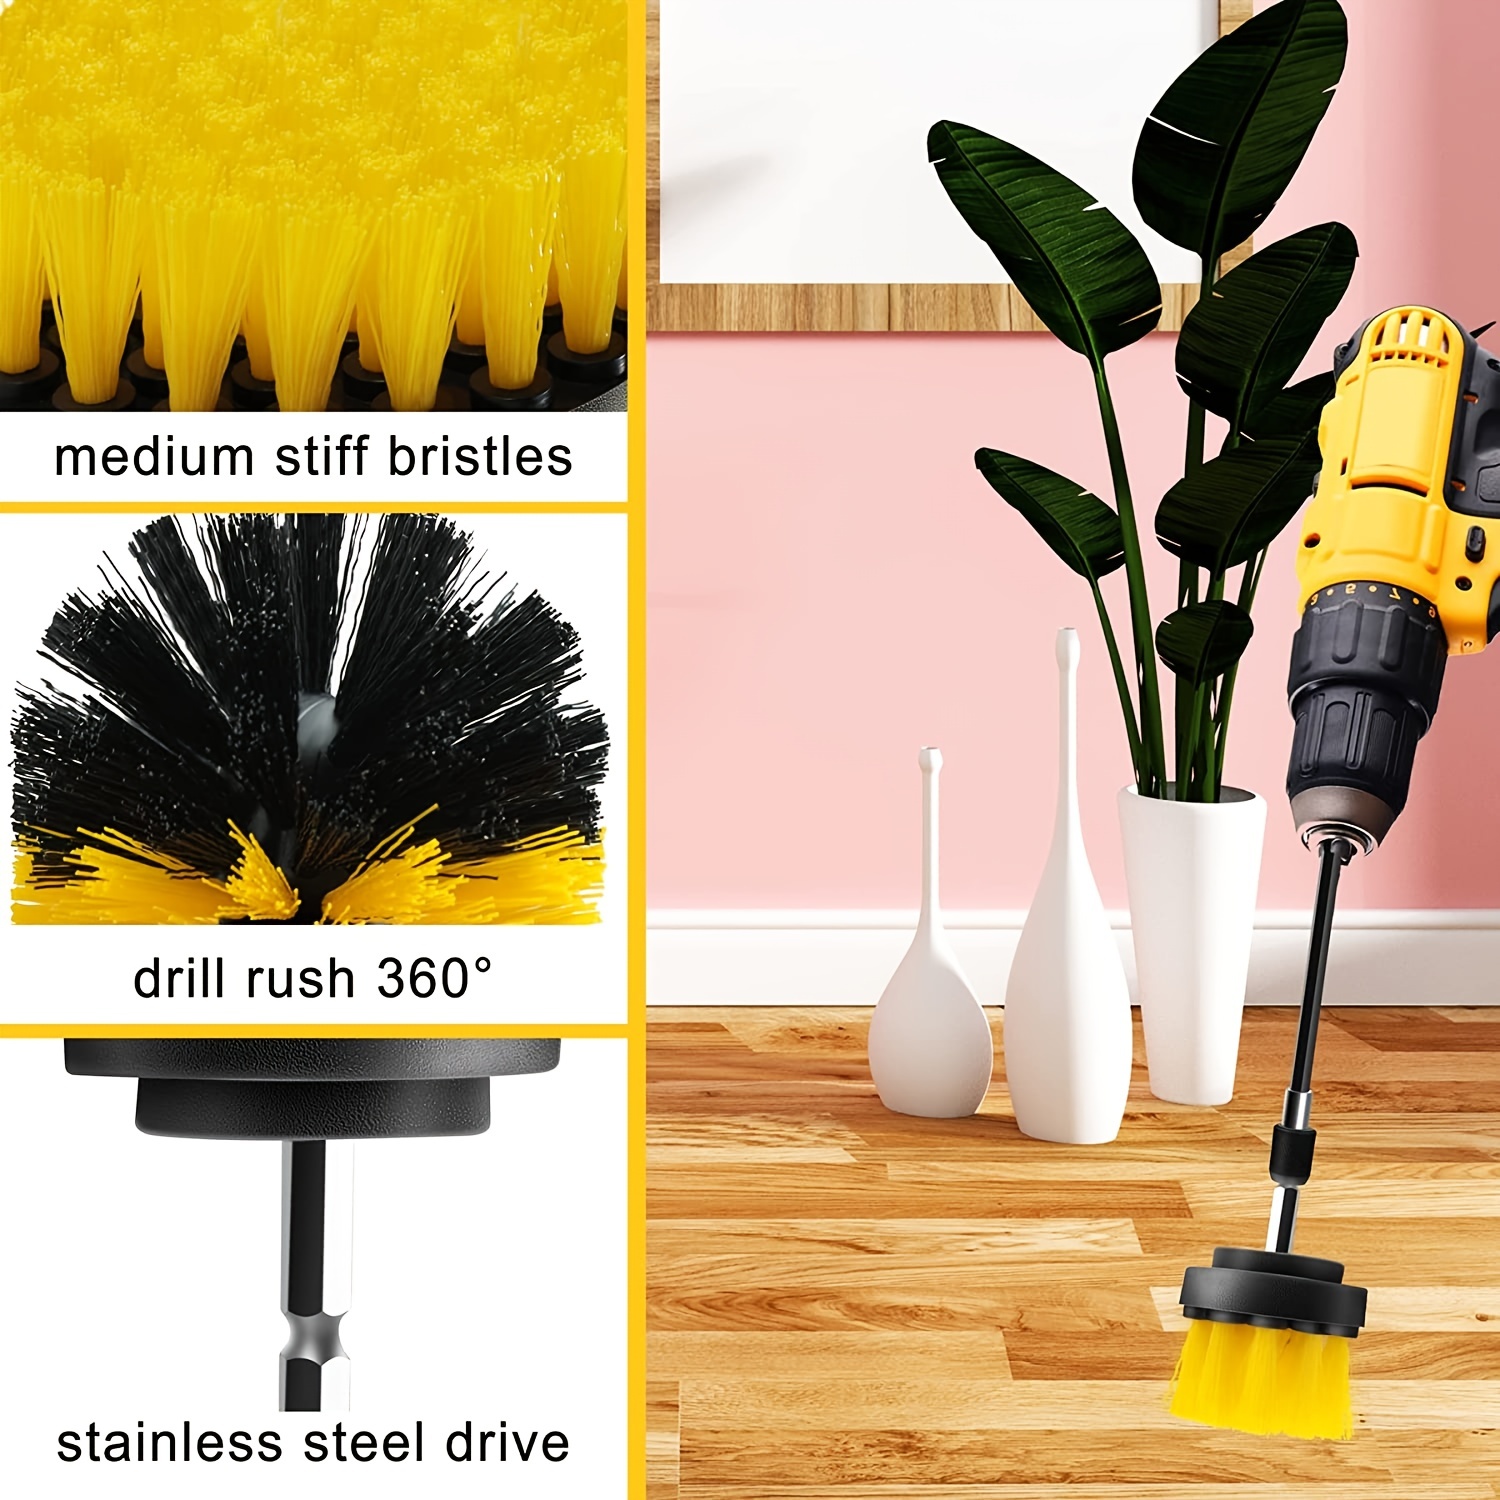 Original Drill Brush 360 Attachments 3 Pack Kit Medium- Yellow All Purpose Cleaner Scrubbing Brushes for Bathroom Surface Grout Tub Shower